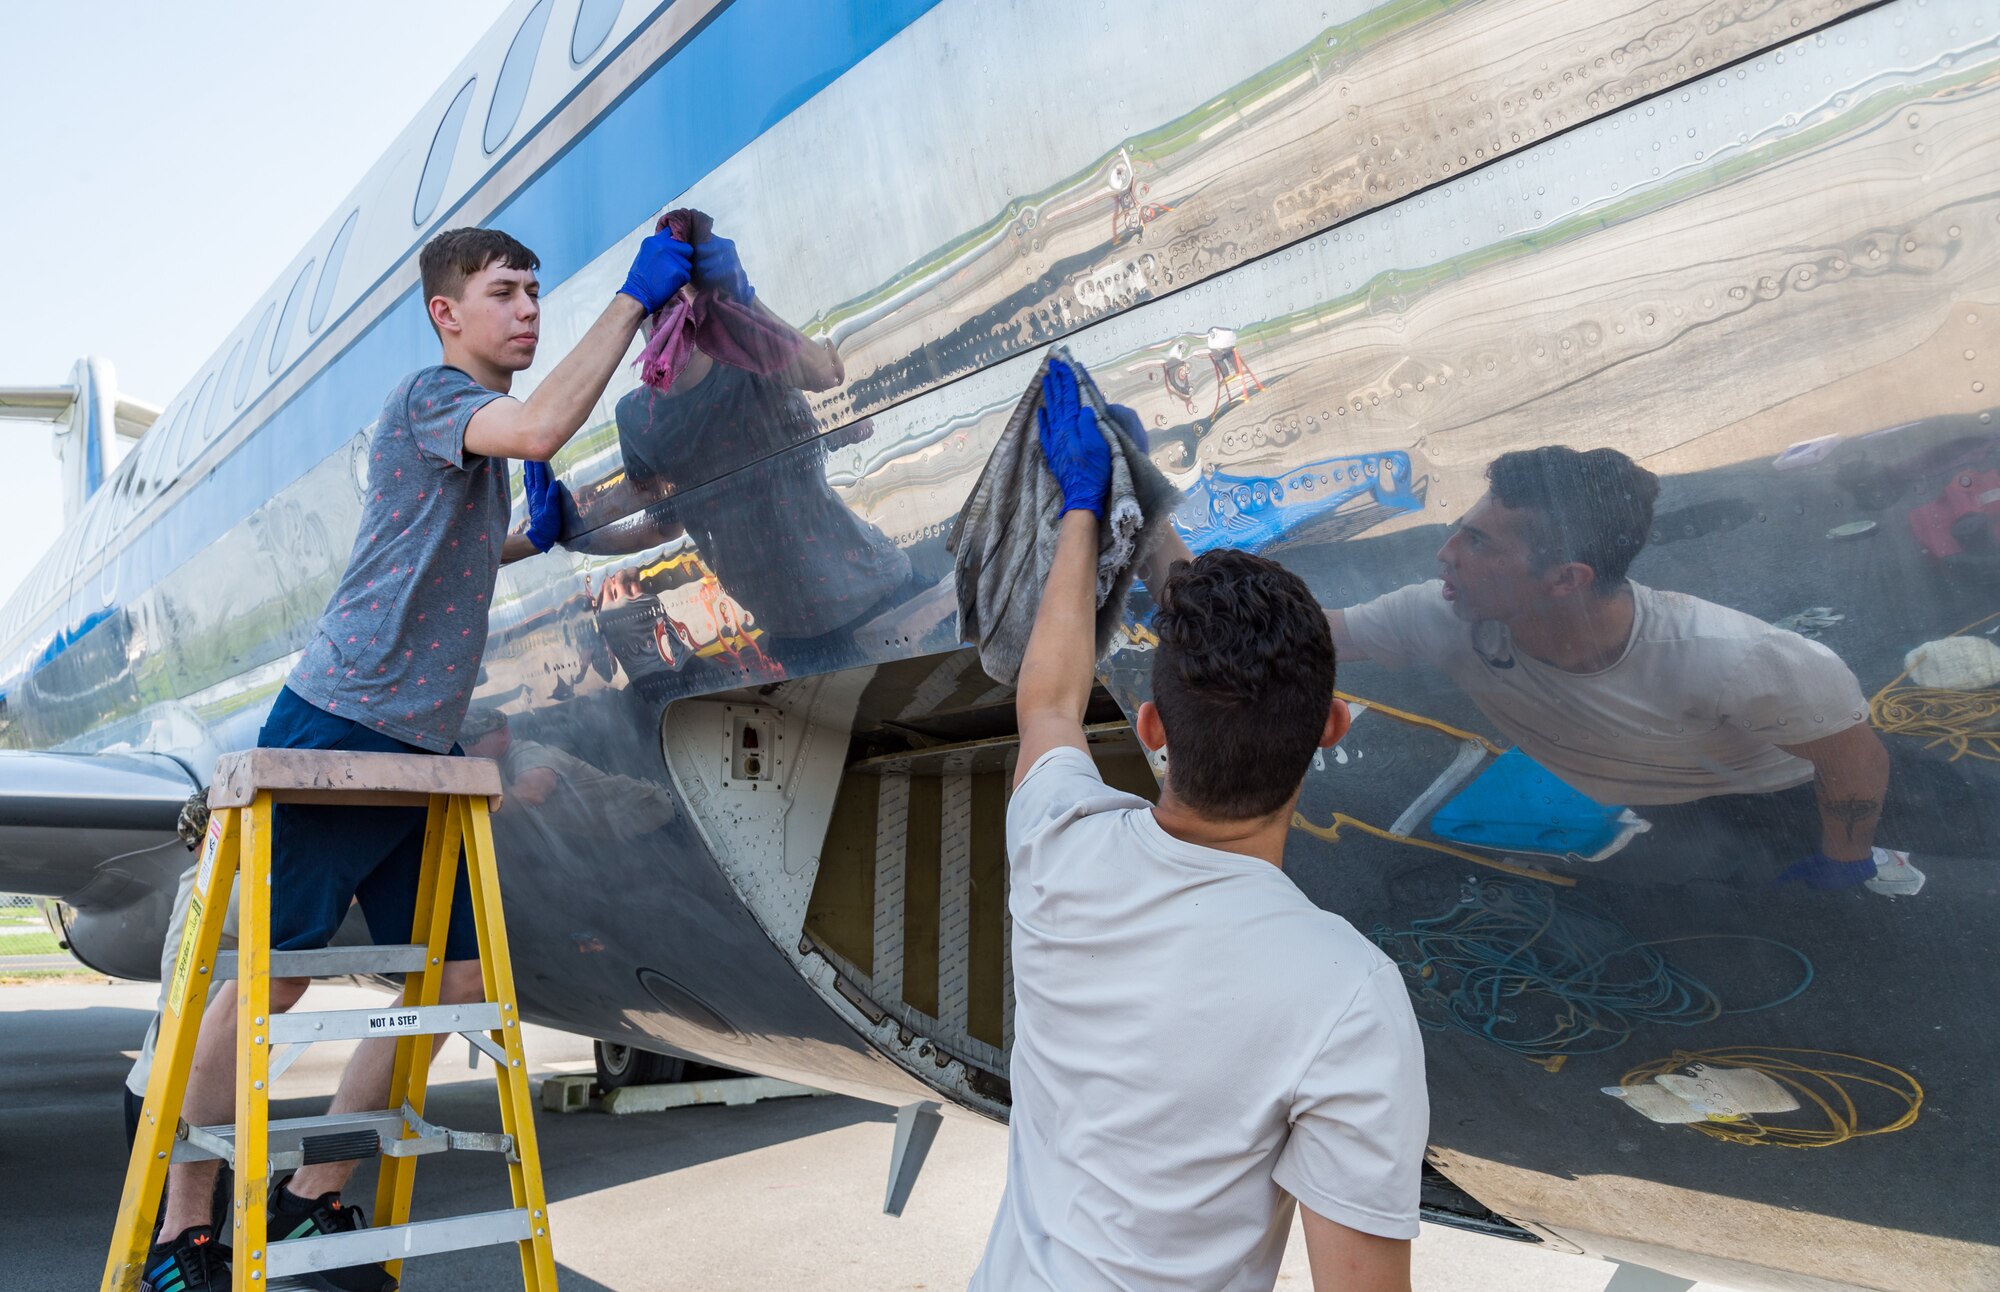 Airman 1st Class Weston Rose, aircraft hydraulic systems apprentice, and Senior Airman Kevin Aguilar, aircraft hydraulic systems journeyman, both from the 436th Maintenance Squadron aircraft hydraulic section, remove cleaning compound from the fuselage of a McDonnell Douglas VC-9C Aug. 25, 2020, at Air Mobility Command Museum on Dover Air Force Base, Delaware. Rose and Aguilar, along with other members of the hydraulic section, volunteered to strip, clean and polish the shiny aluminum skin of the aircraft formerly designated as Air Force Two. (U.S. Air Force photo by Roland Balik)